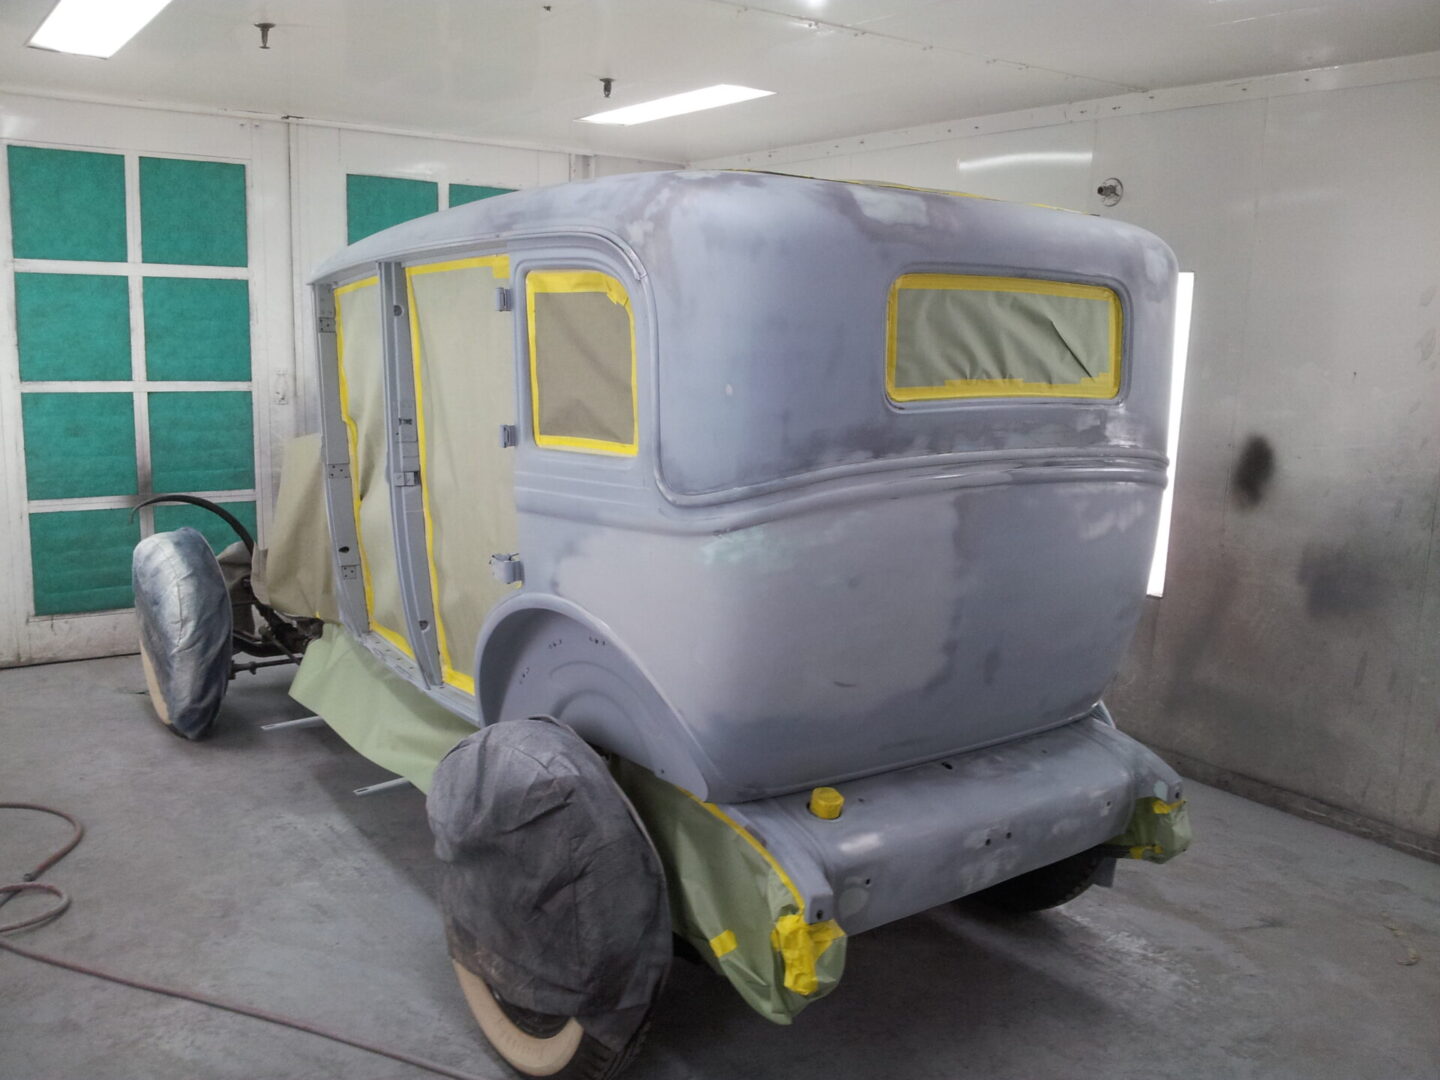 A 1930 Chevrolet being repainted